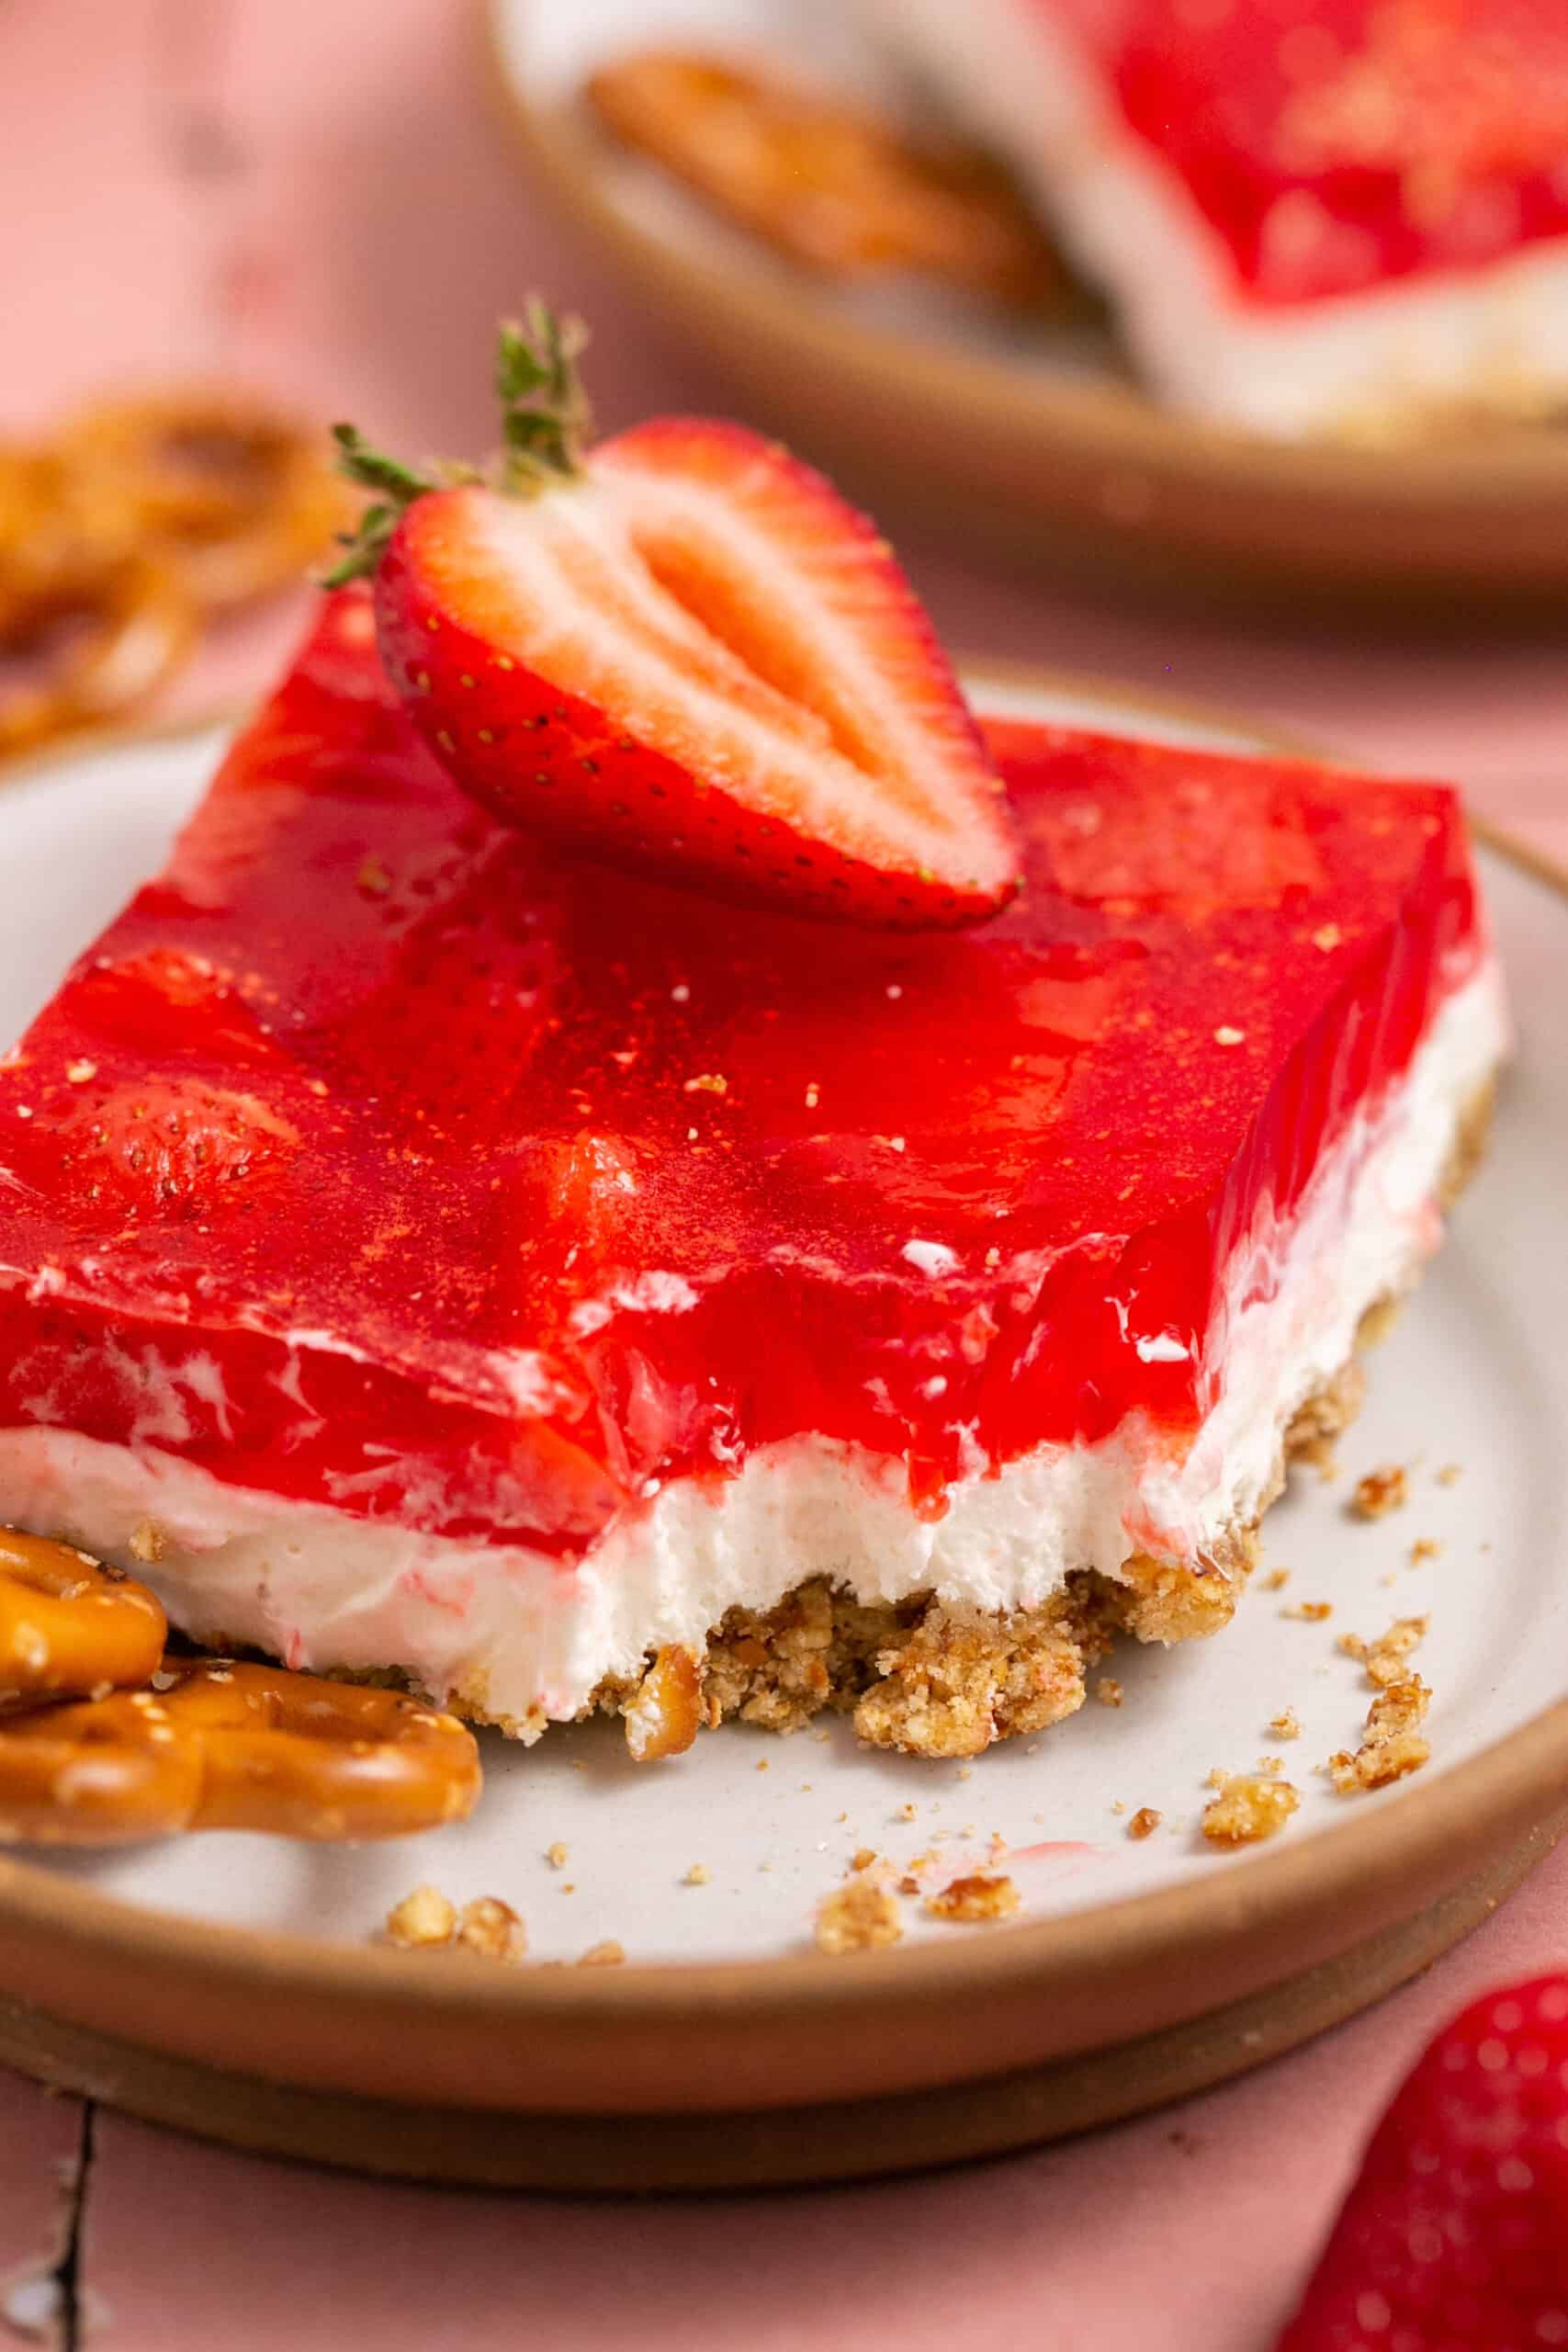 Low sugar strawberry pretzel salad topped with a strawberry on a small plate.